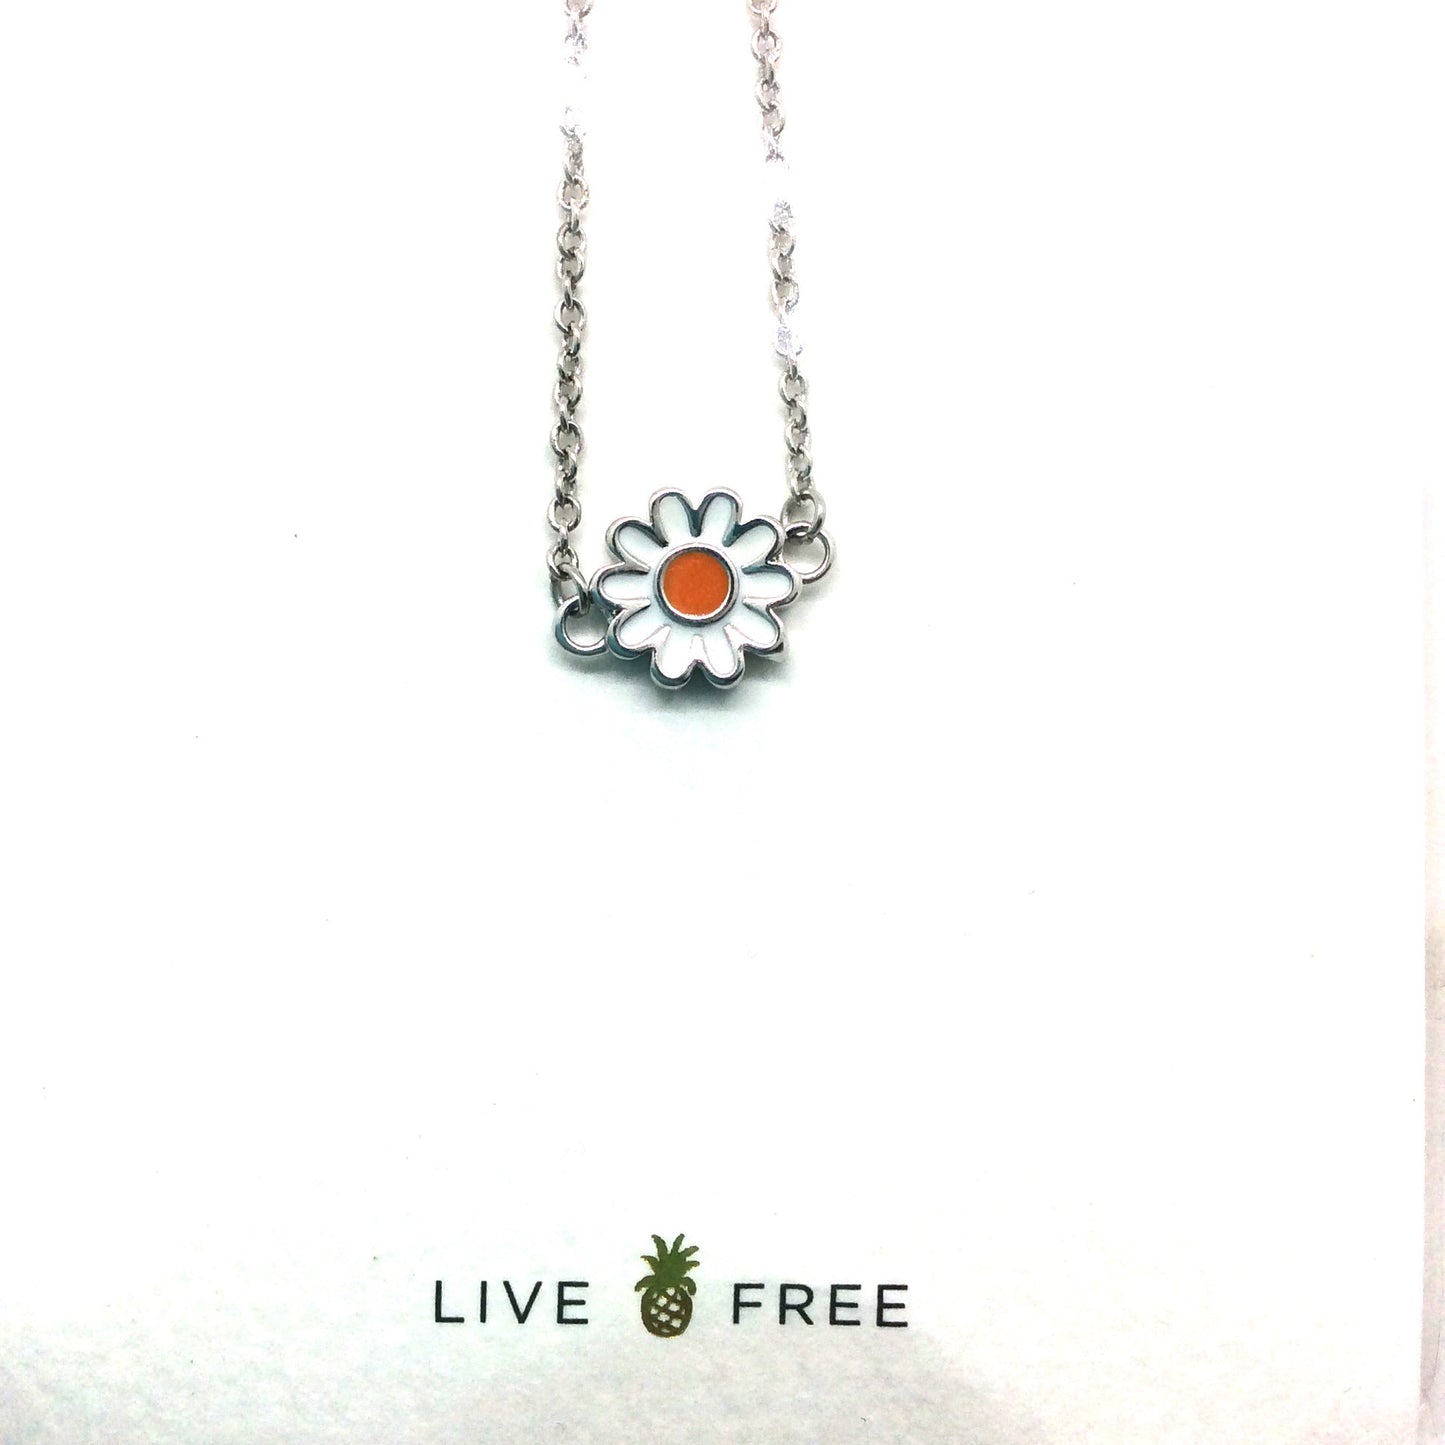 Necklace Charm By Puravida